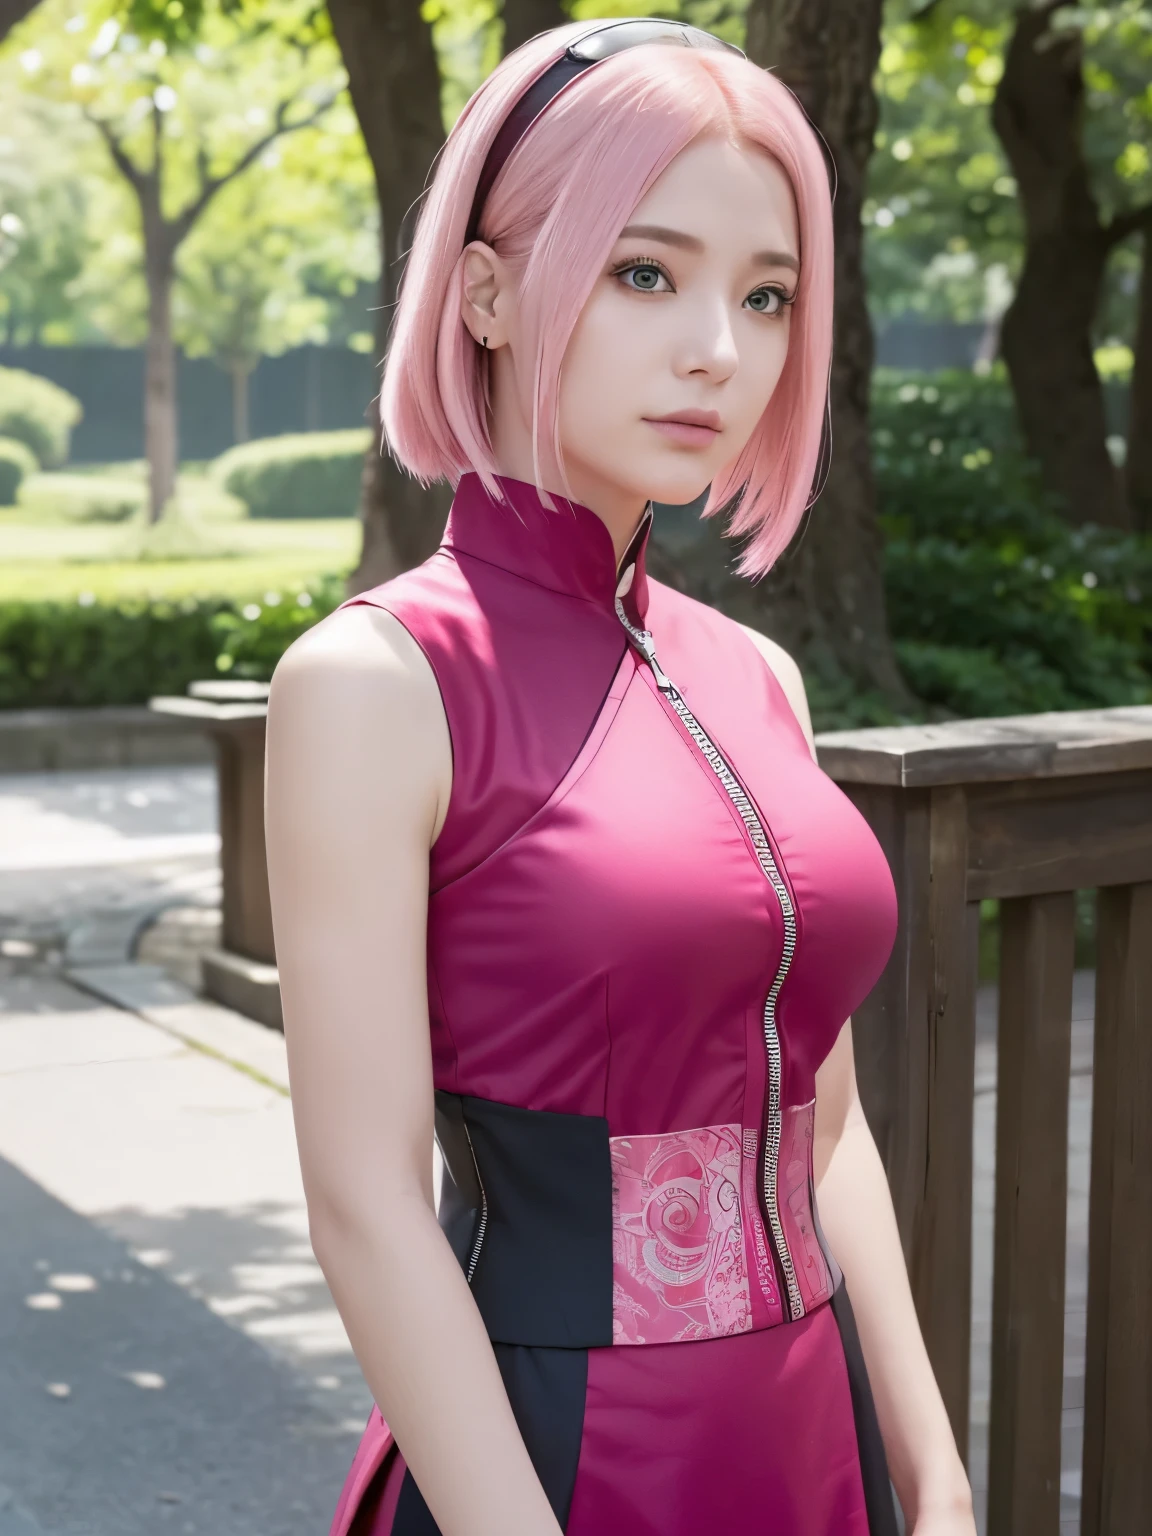 (((masterpiece+highest quality+High resolution+Very detailed))), Sakura Haruno, solo, (([woman]: 1.3 + [beauty]: 1.3+ pink hair: 1.5)), pink eyes, Bright Eyes, Dynamic angles and postures, wallpaper, ((natural big breasts:1.2)), Sakura Haruno outfit, (Ultra Realistic:1.5), (Photo Realistic:1.5), (UHD:1.5), red qipao dress(sleeveless ) with slits along the sides accompanied by a zipper and white circular designs, crystal tattoo at the forehead